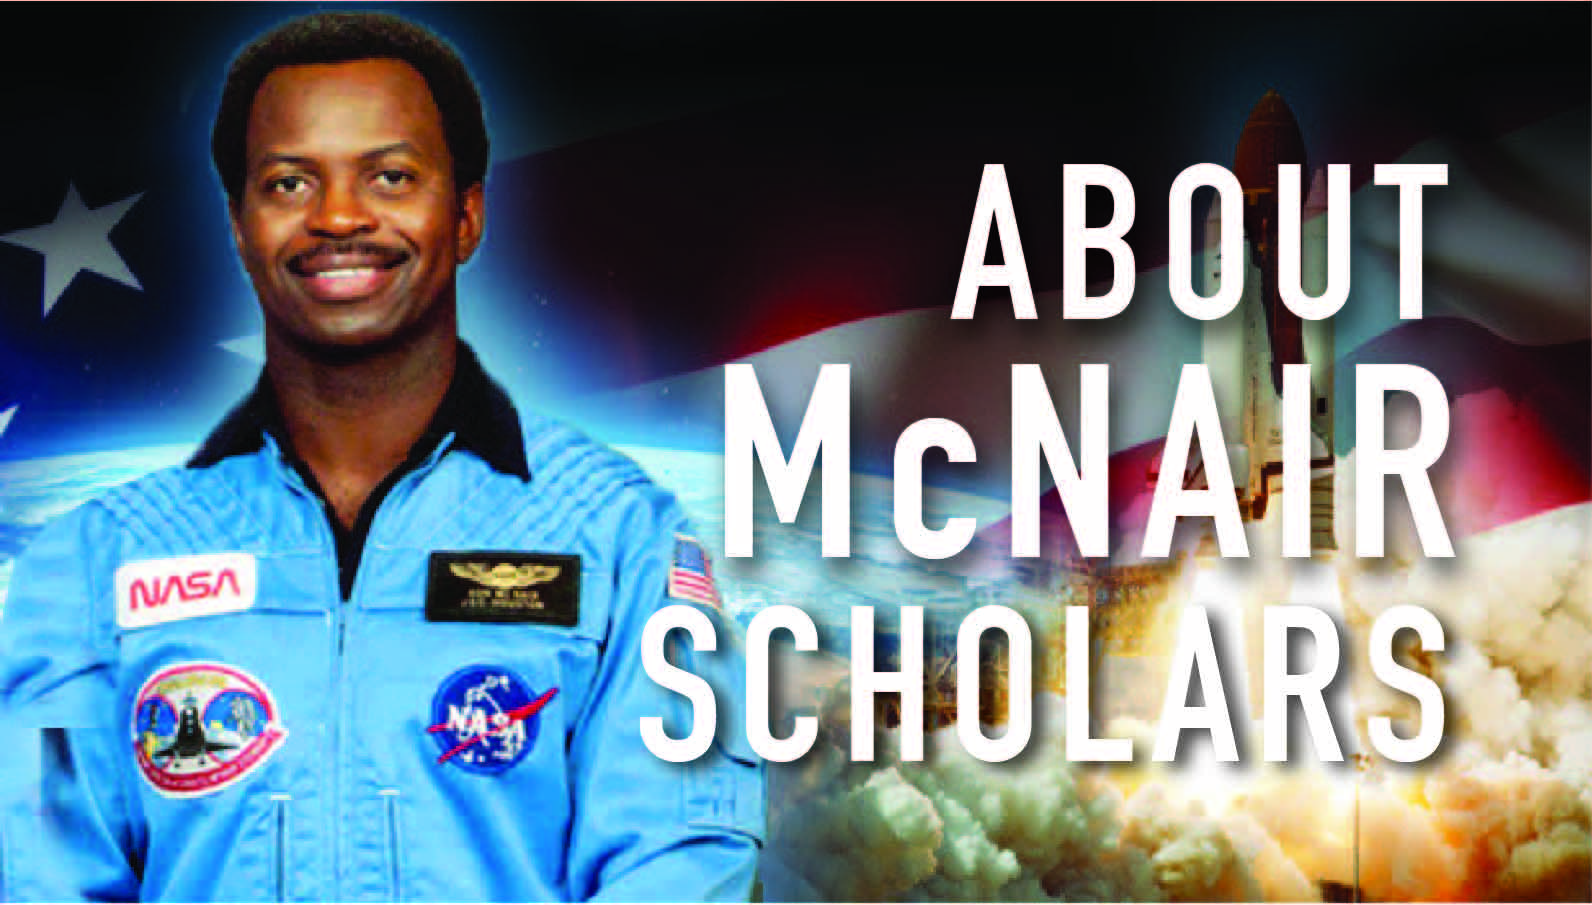 About McNair Scholars